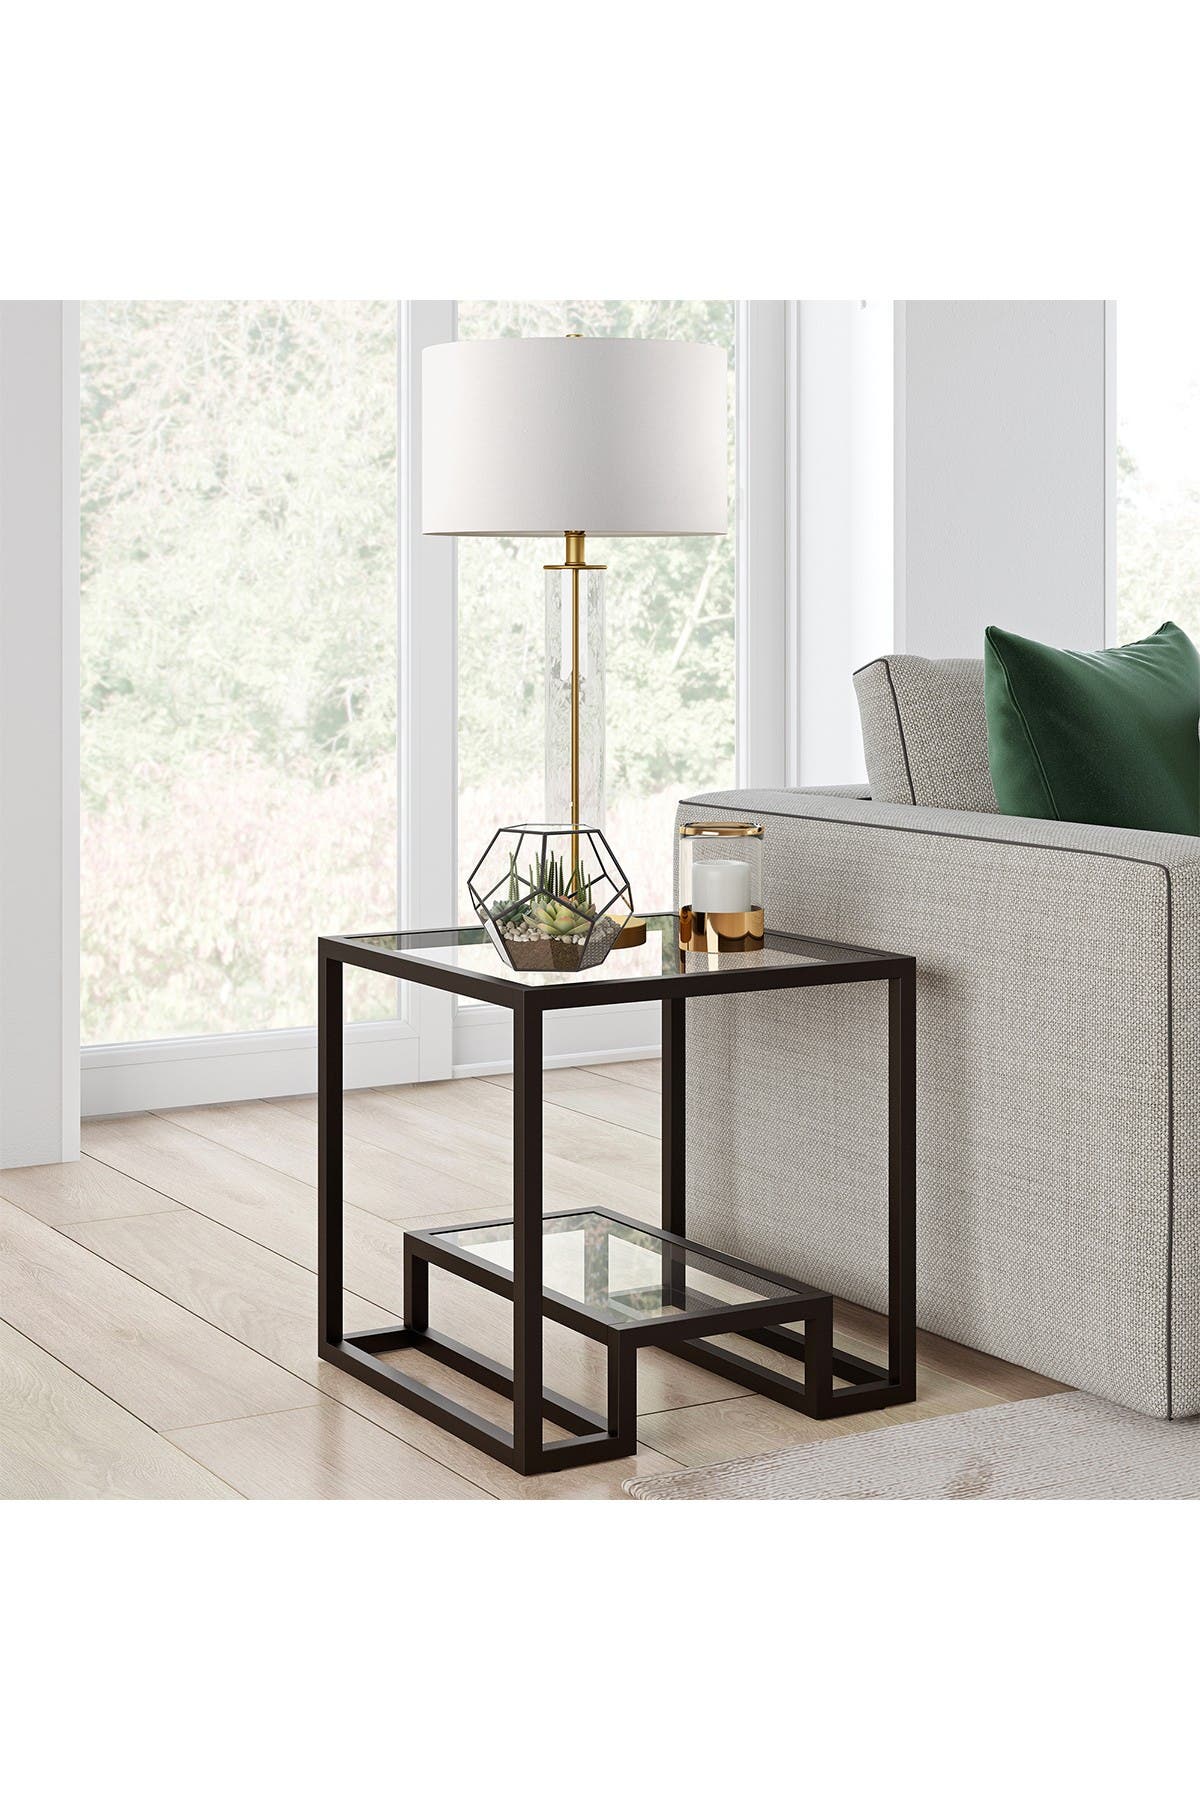 Addison And Lane Athena Blackened Bronze Side Table In Rust/copper1